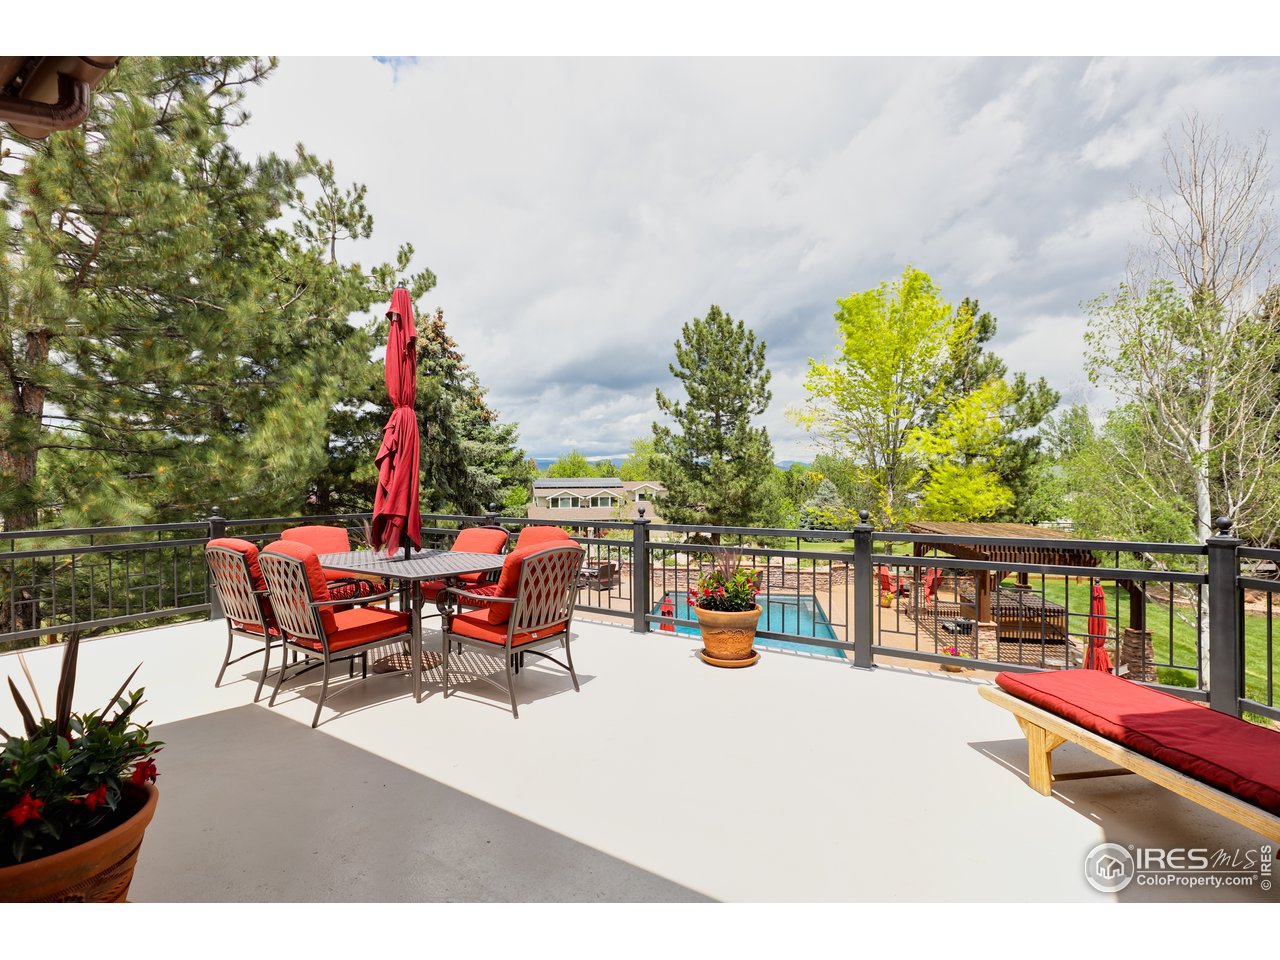 Upper deck with mountain views over the pool!